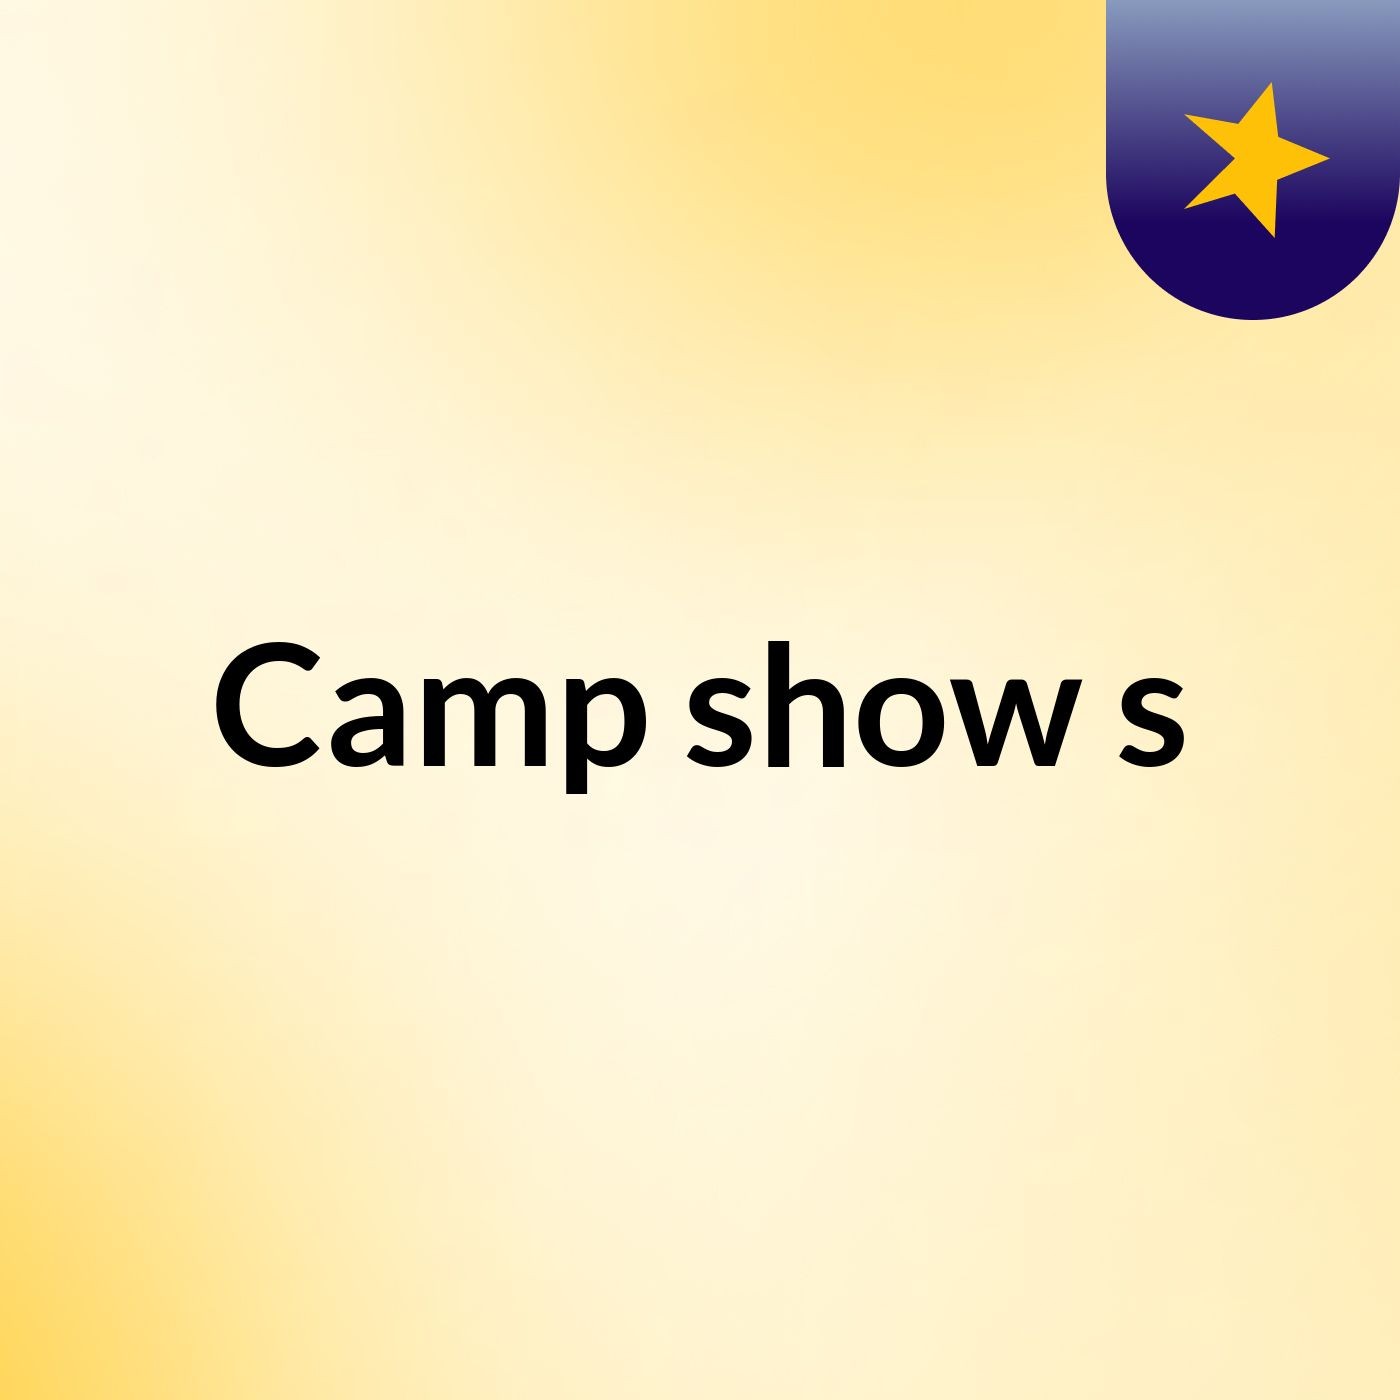 Camp show,s